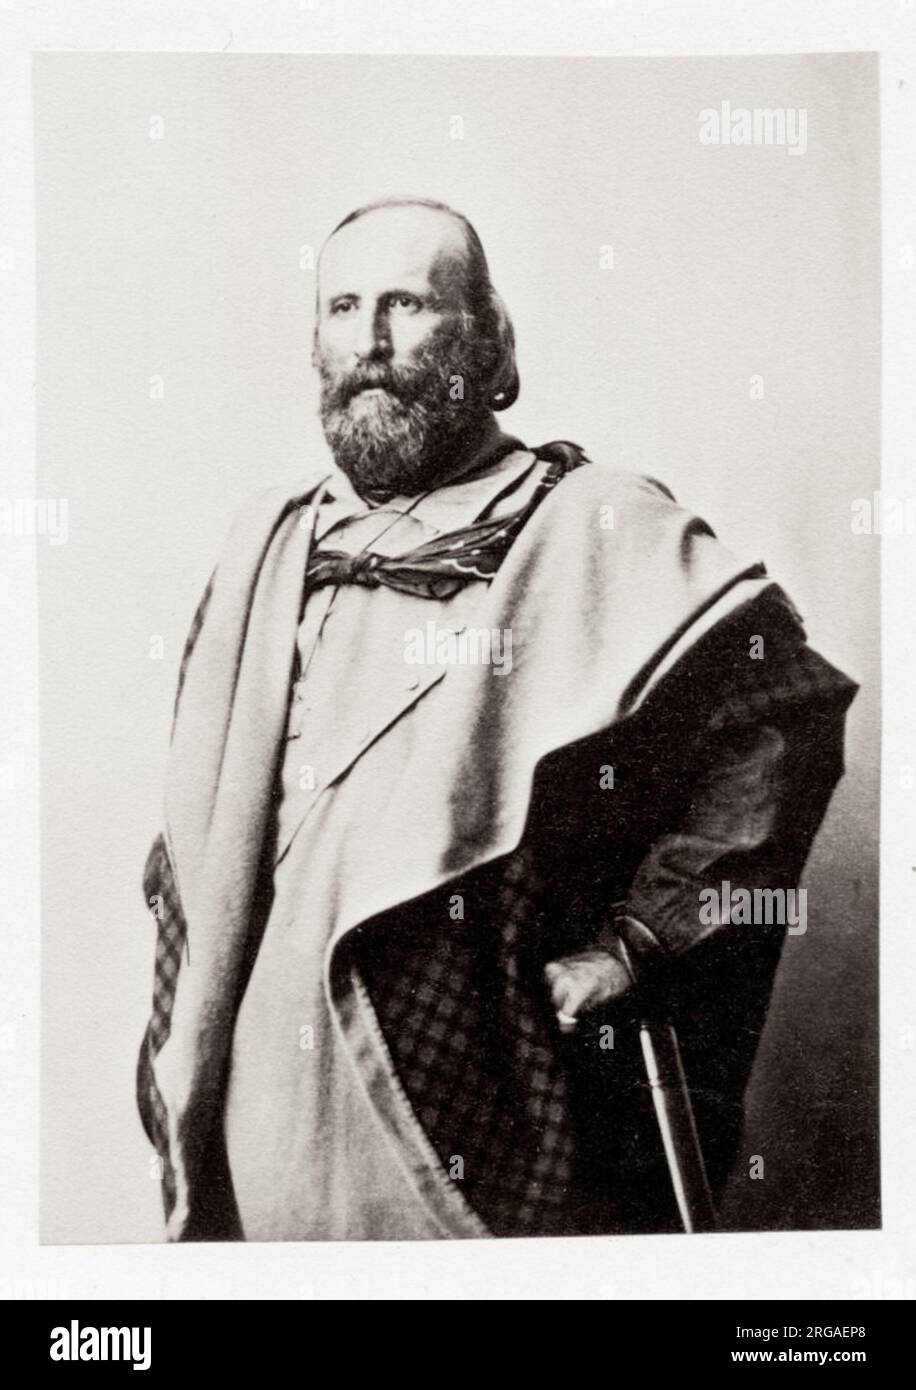 Vintage 19th century photograph: Giuseppe Maria Garibaldi was an Italian general, patriot and republican. He contributed to the Italian unification and the creation of the Kingdom of Italy. Stock Photo